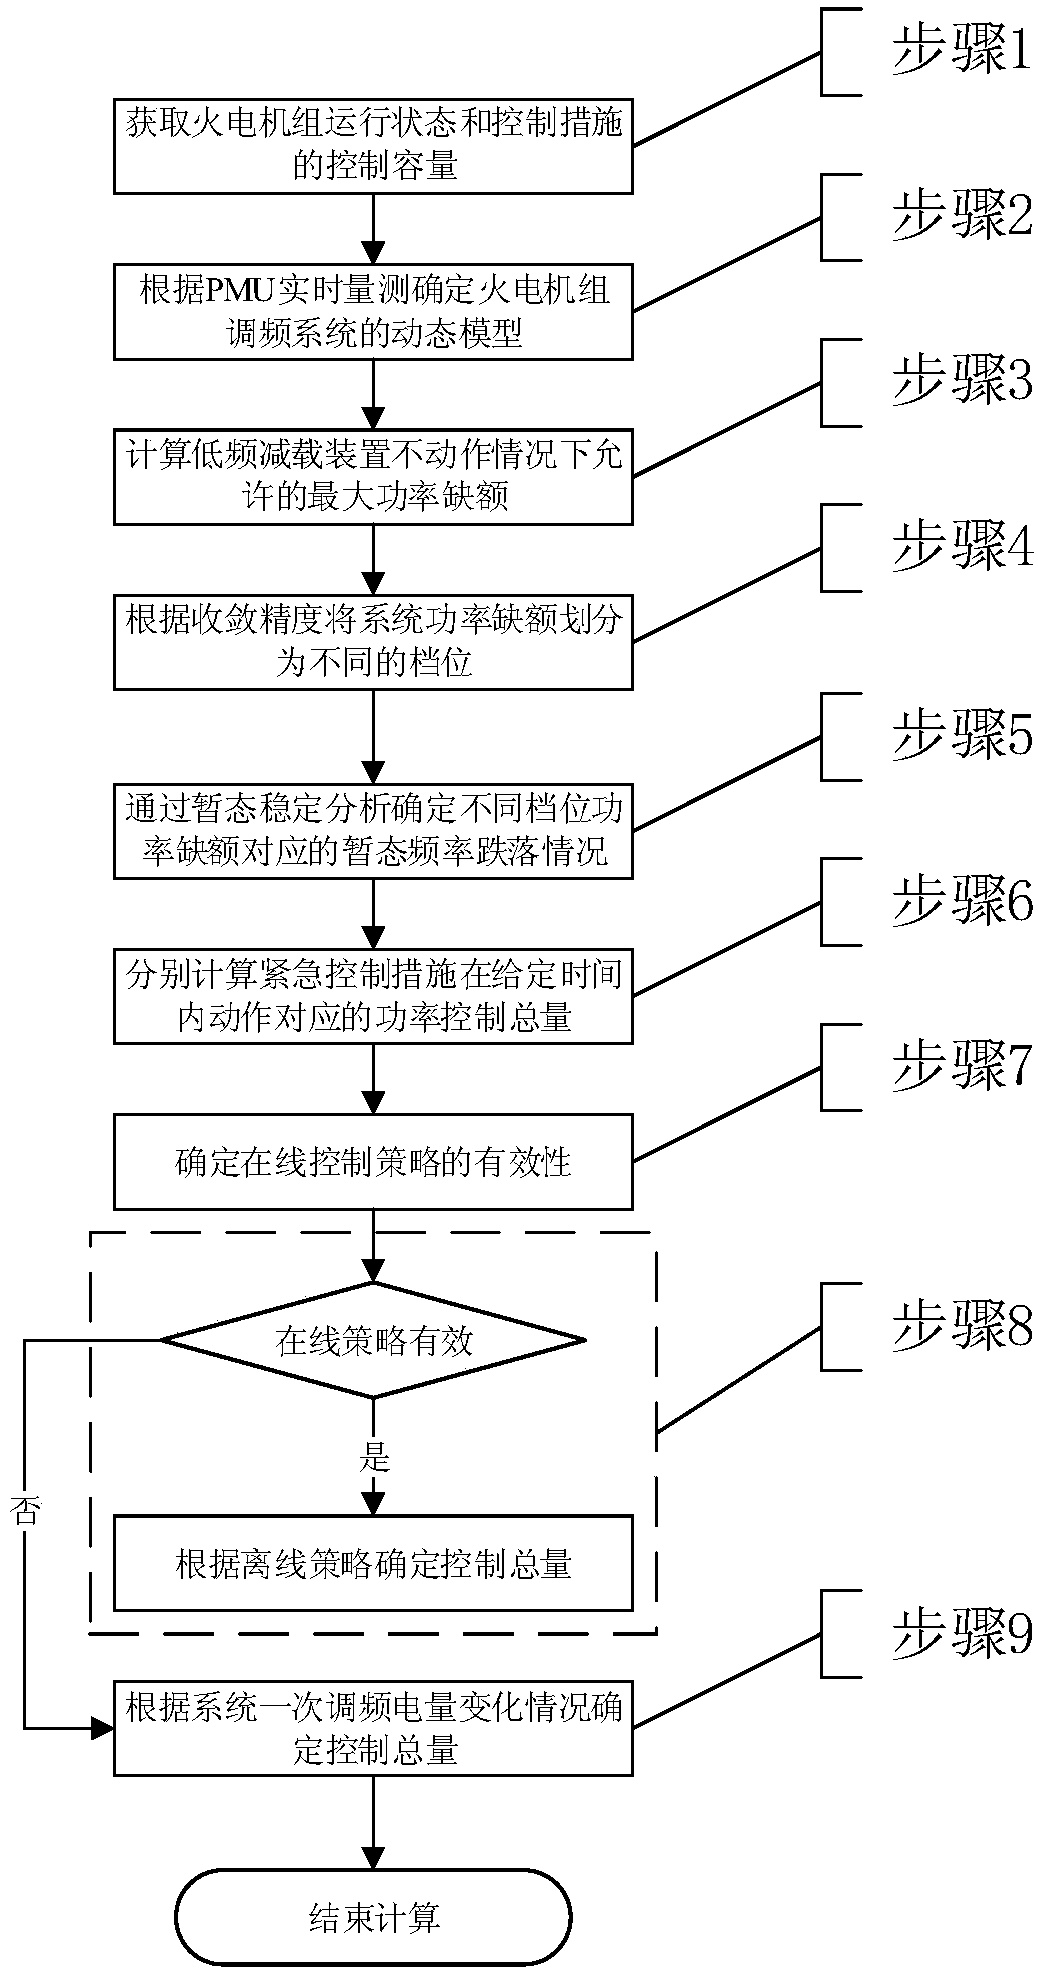 Frequency stability adaptive emergency control method for high-capacity multi-infeed DC power grid